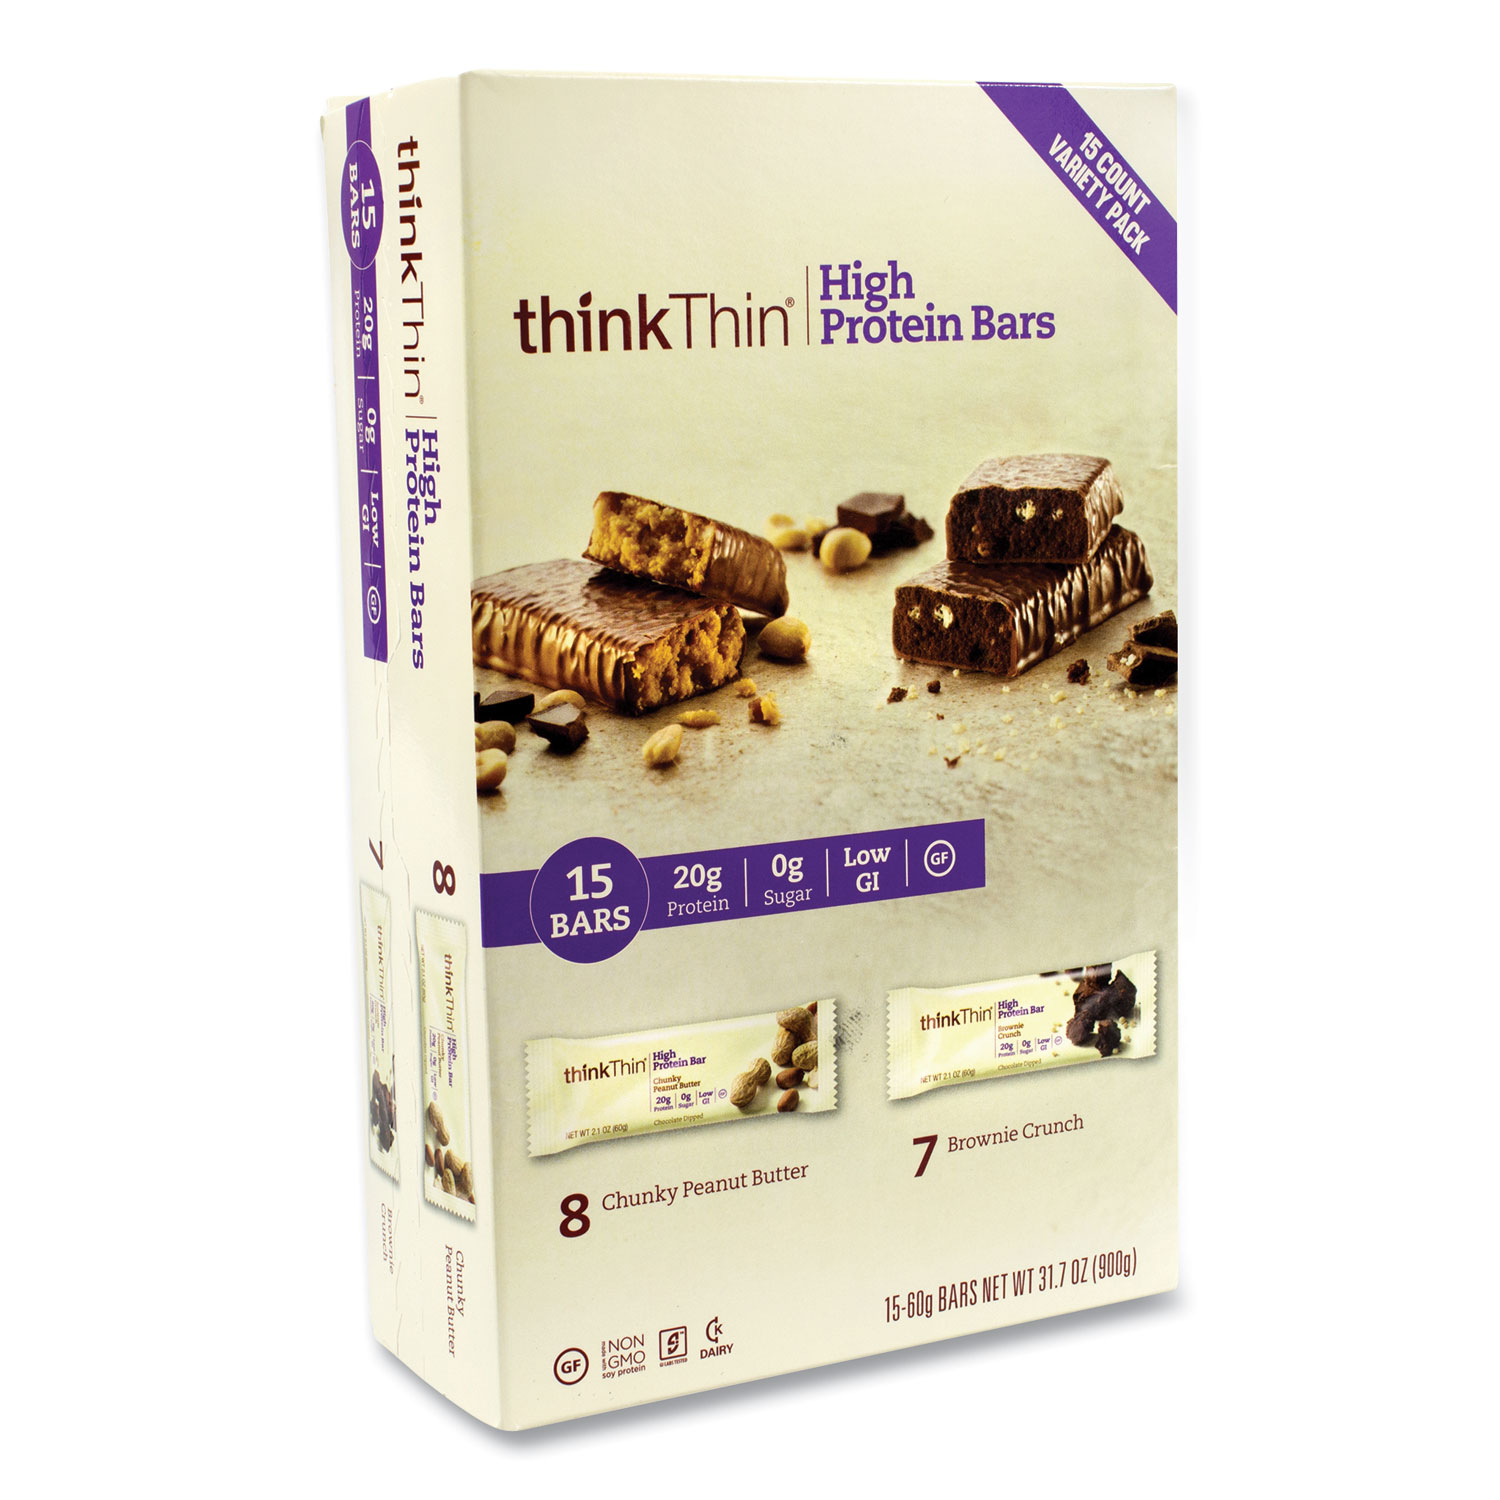  thinkThin 33142 High Protein Bars, Brownie Crunch/Chunky Peanut Butter, 2.1 oz Bar, 15 Bars/Carton, Free Delivery in 1-4 Business Days (GRR22000555) 